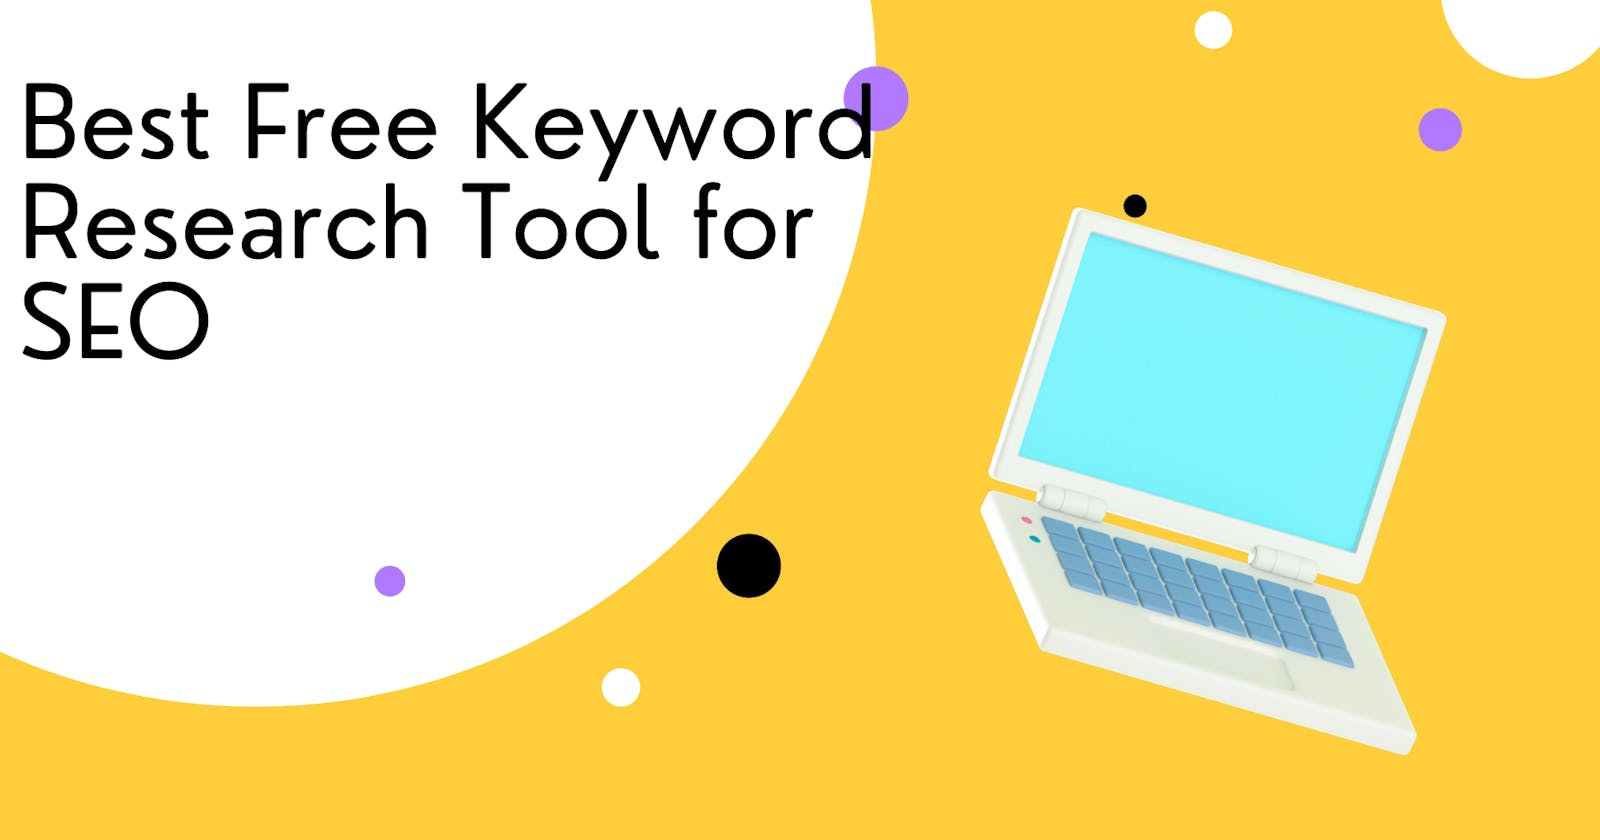 Best Free Keyword Research Tool for SEO